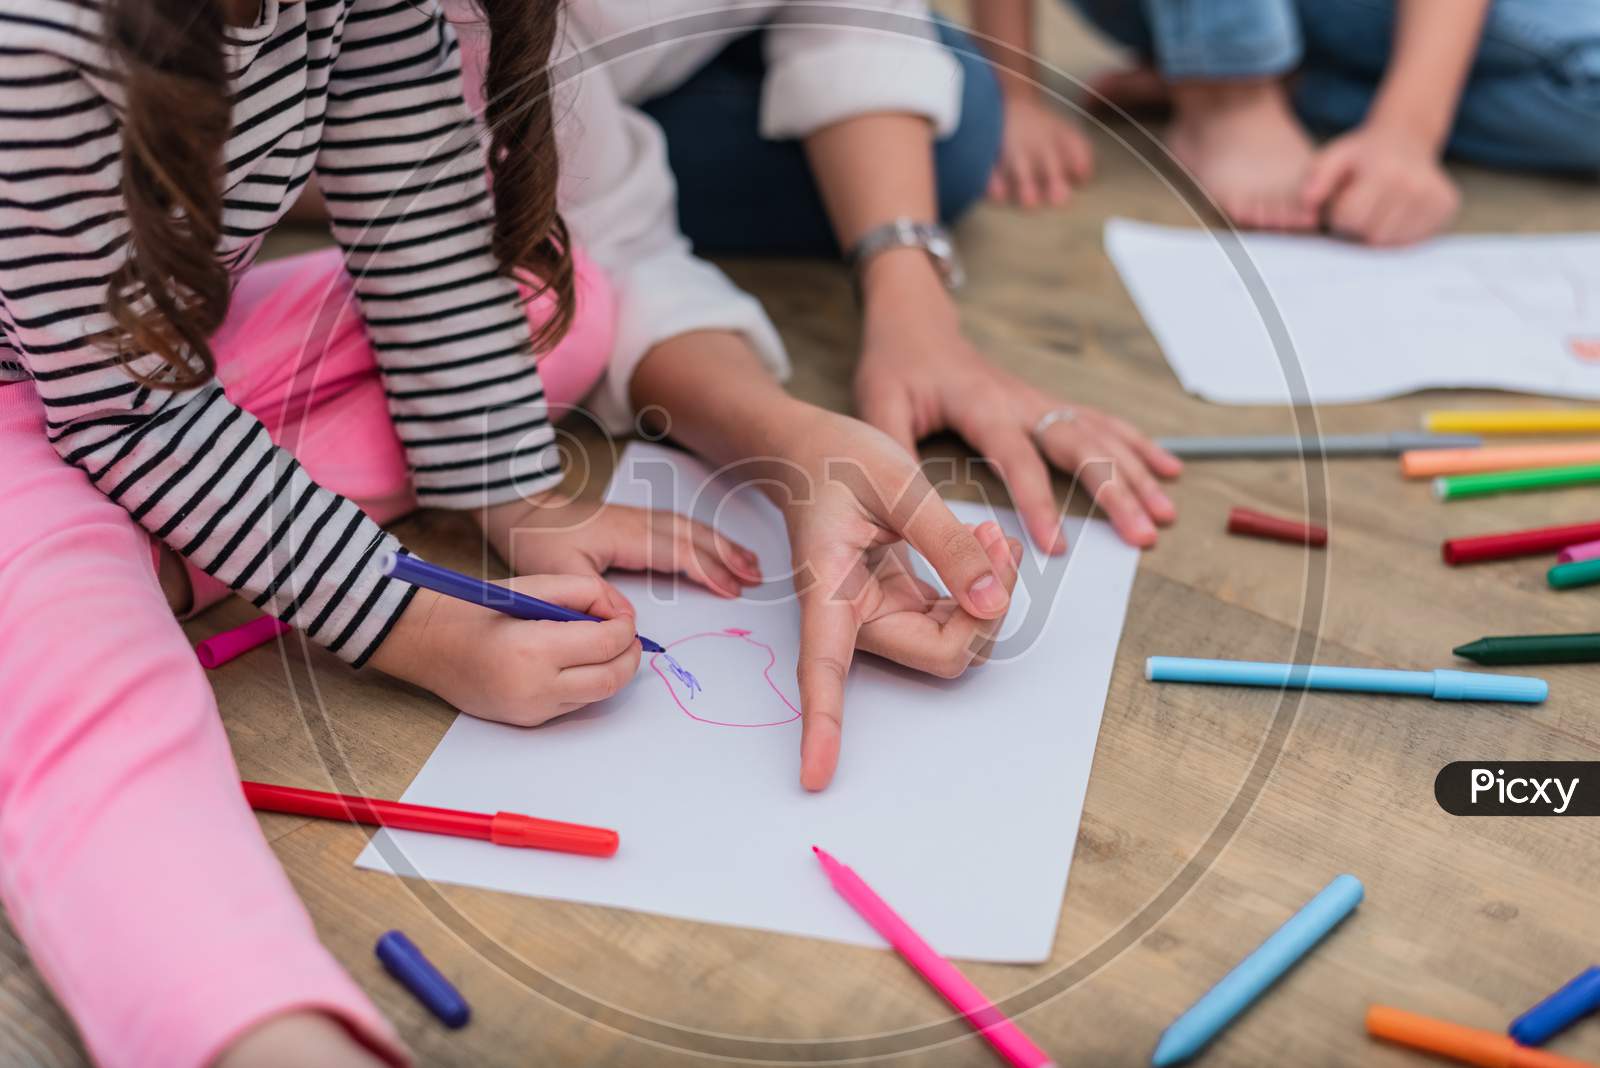 Closed Up Hands Of Mom Teaching Little Children To Drawing Cartoon In Art Class With Color Pen. Back To School And Education Concept. Family And Home Sweet Home Theme. Preschool Kids Theme